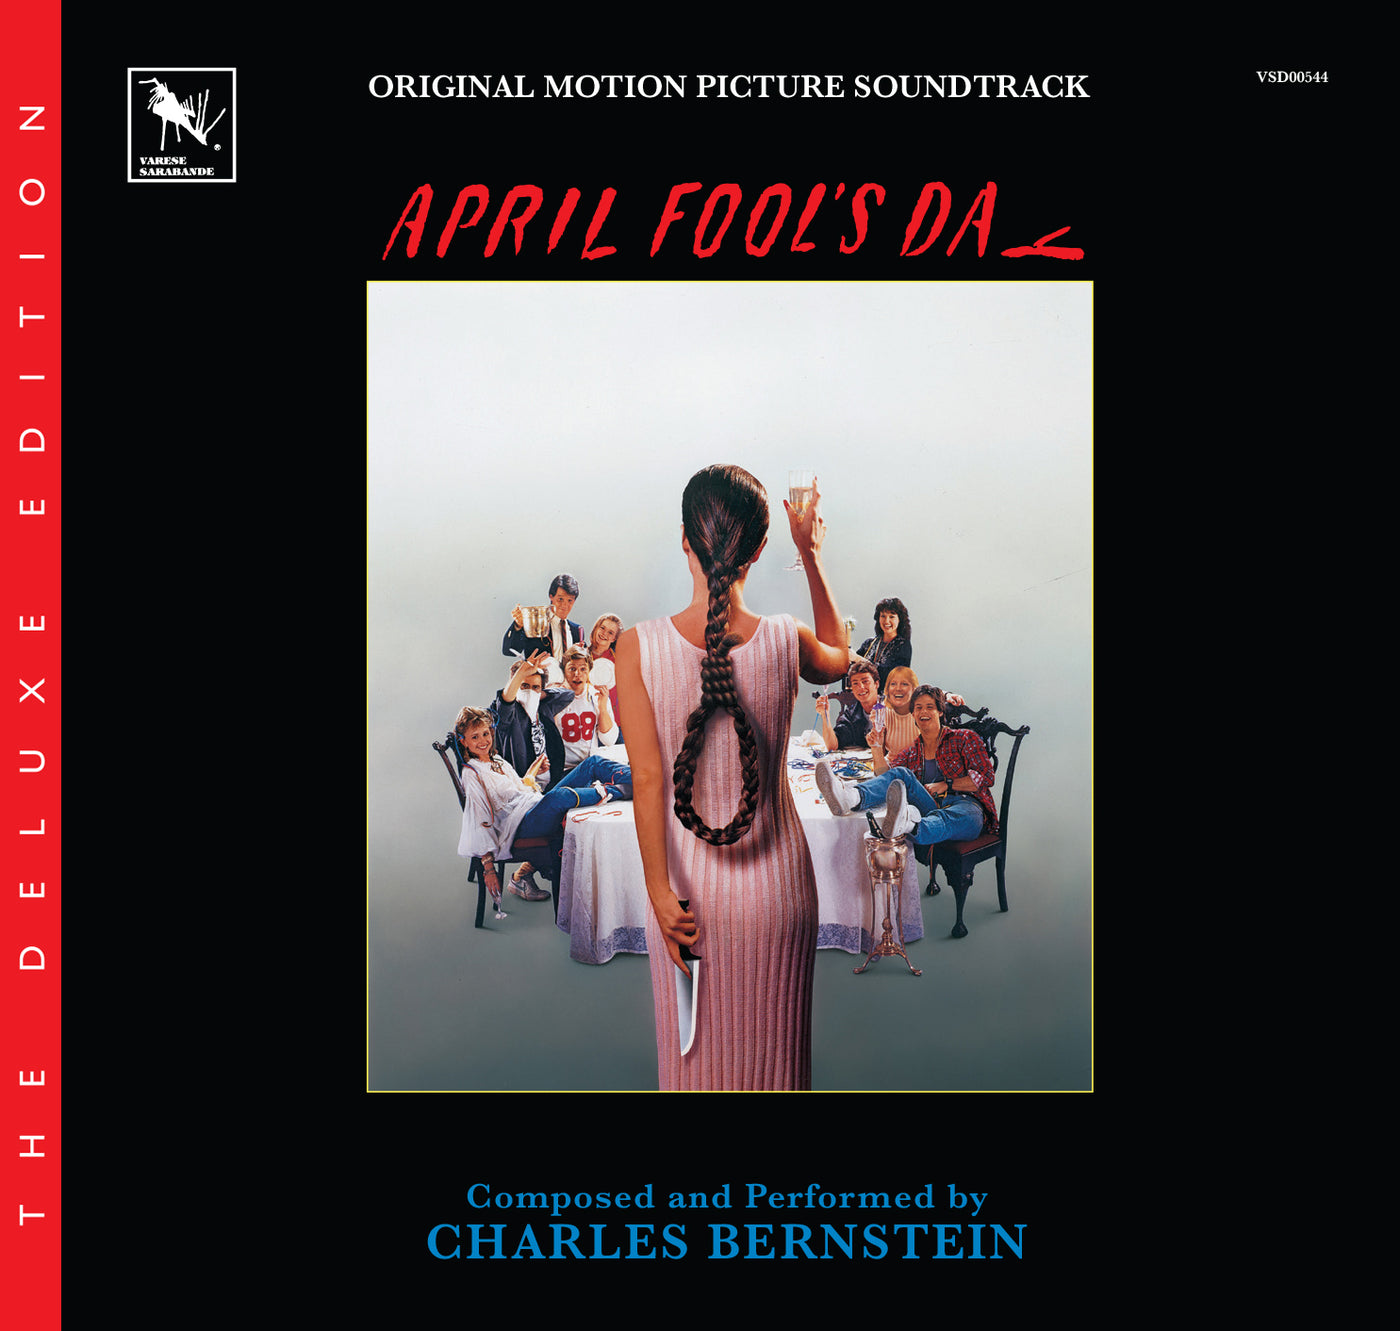 Charles Bernstein – April Fool’s Day (Original Motion Picture Soundtrack -Deluxe Edition) CD